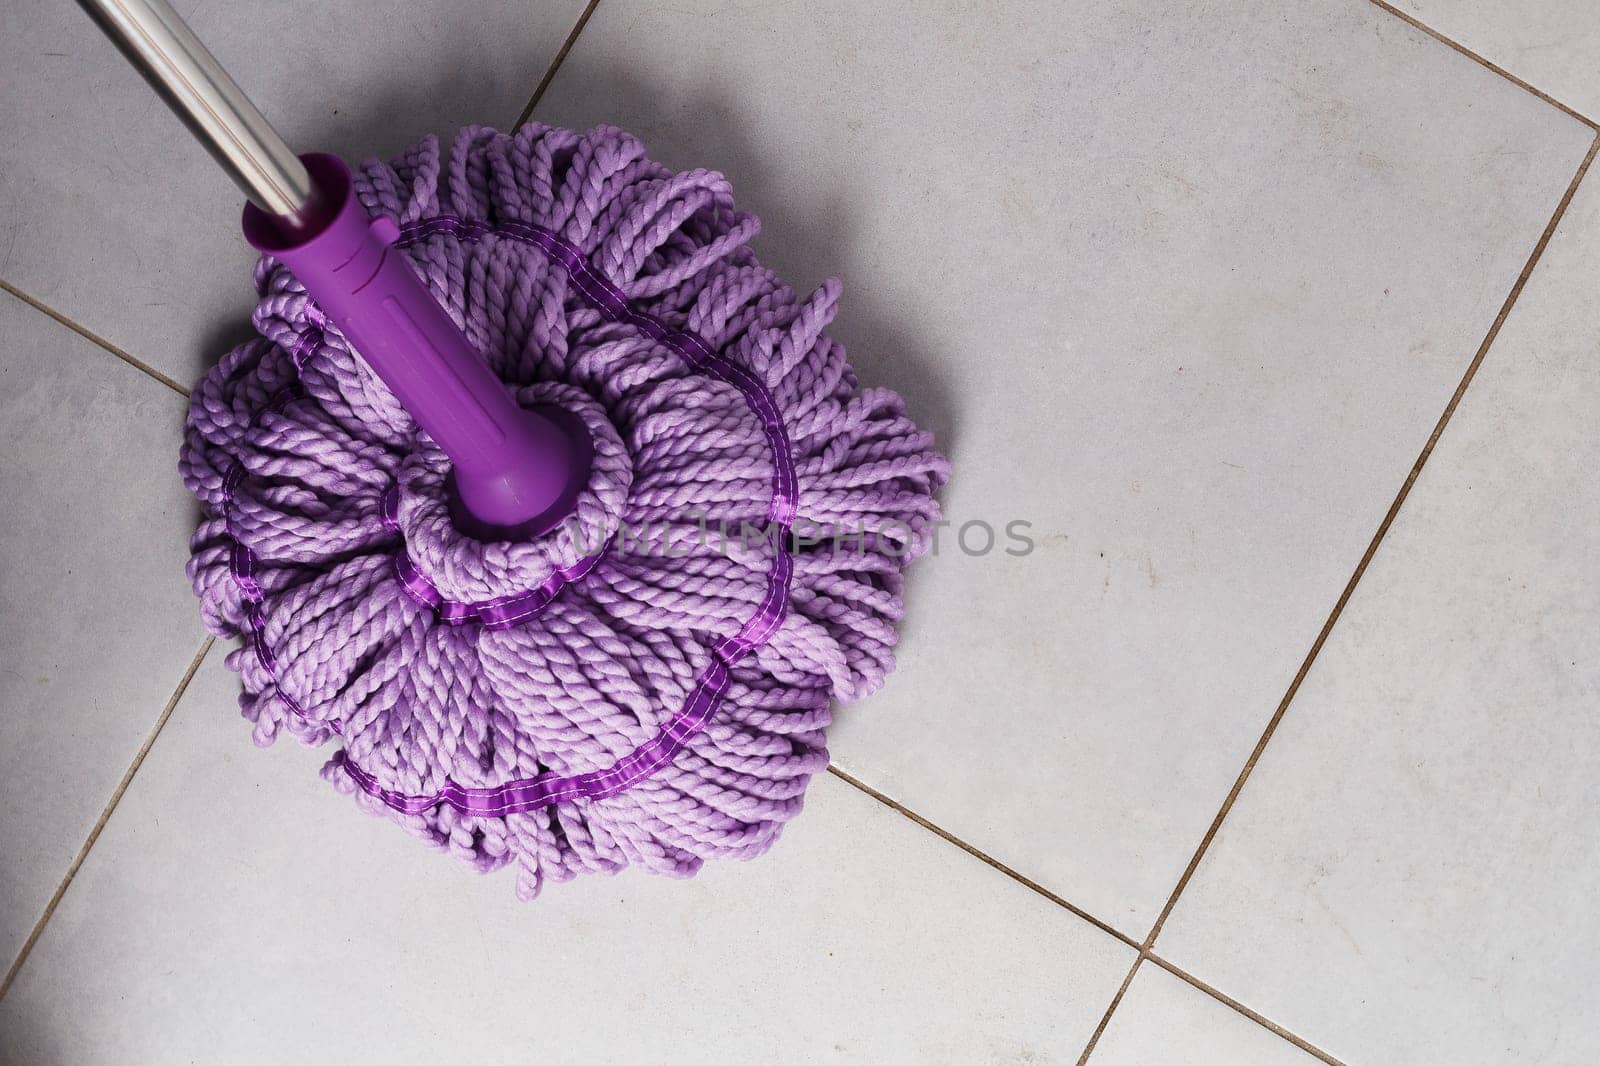 Purple mop on the bathroom floor. The concept of indoor cleaning. copy space.